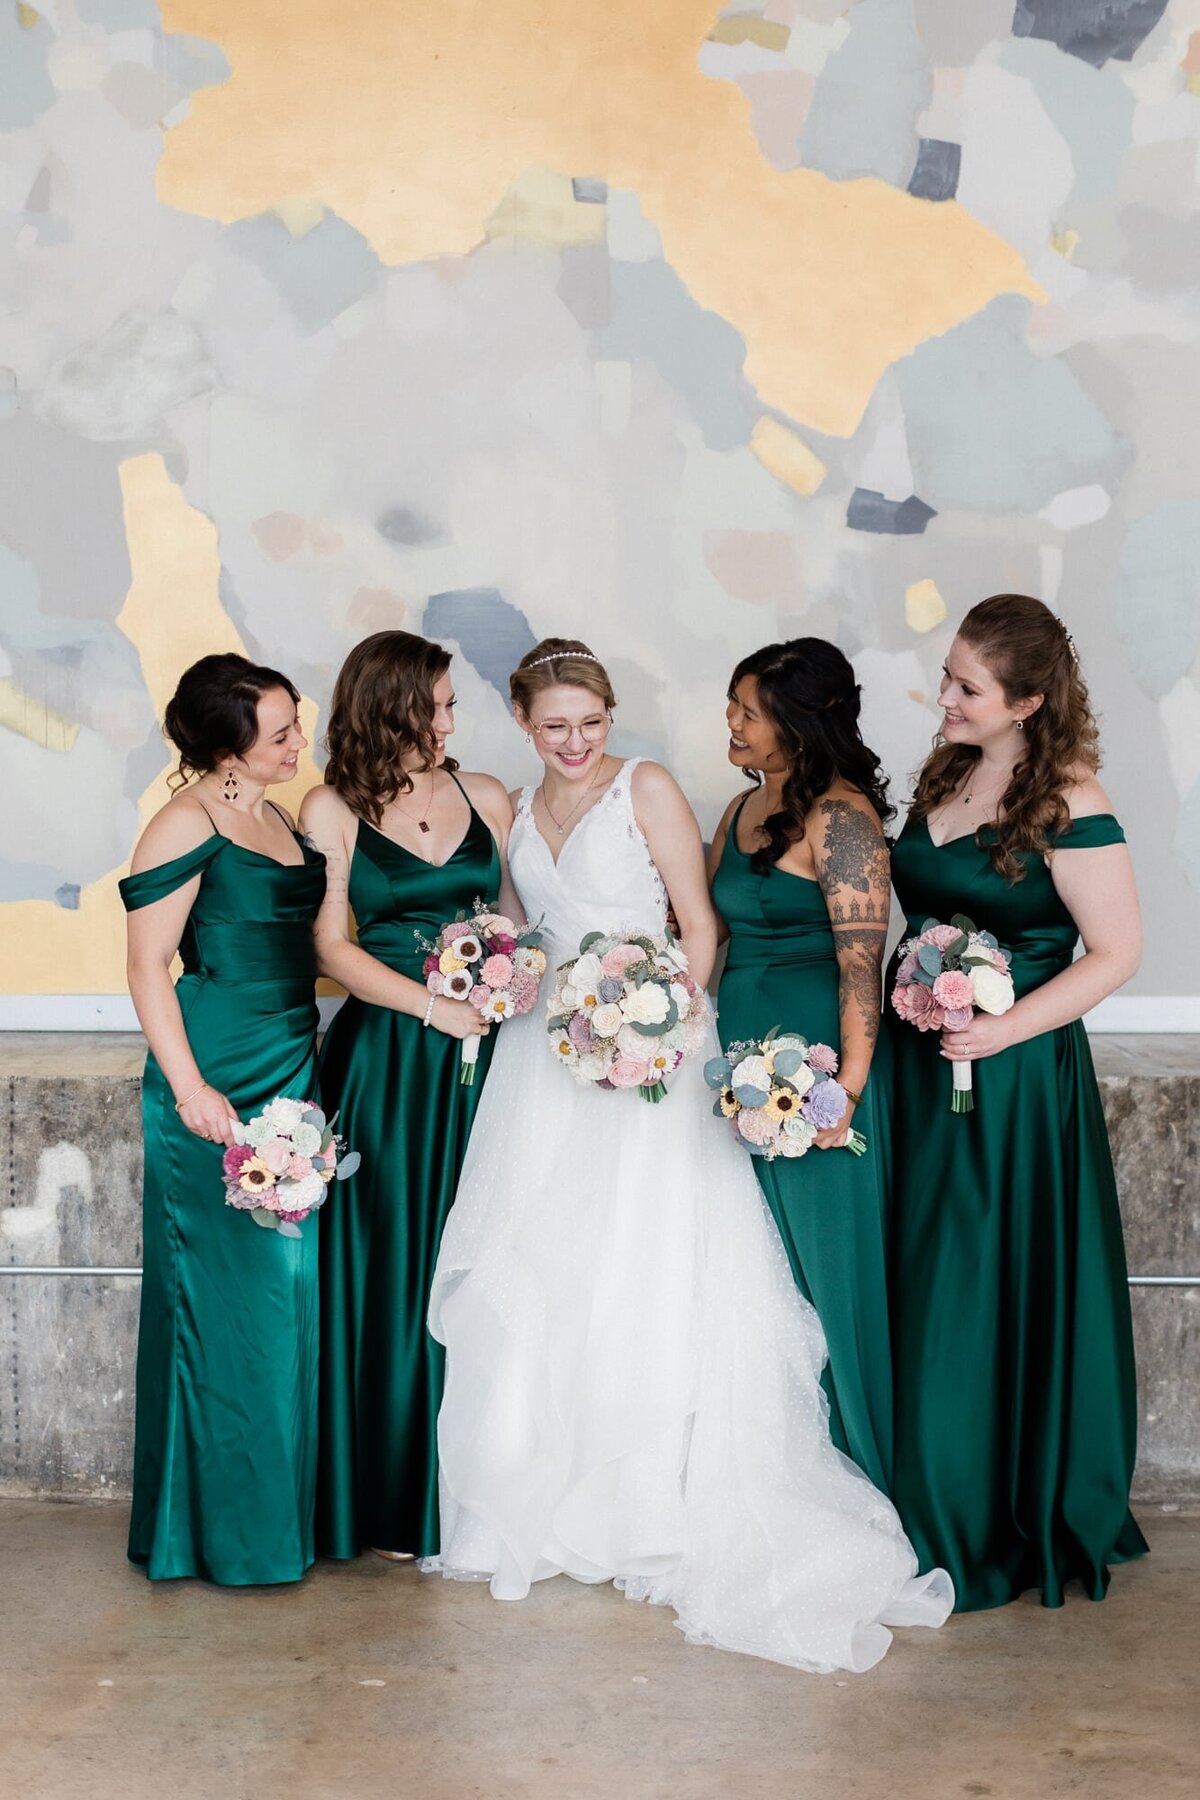 Bride and Bridesmaids wearing emerald green by the mural inside The Bond in York PA